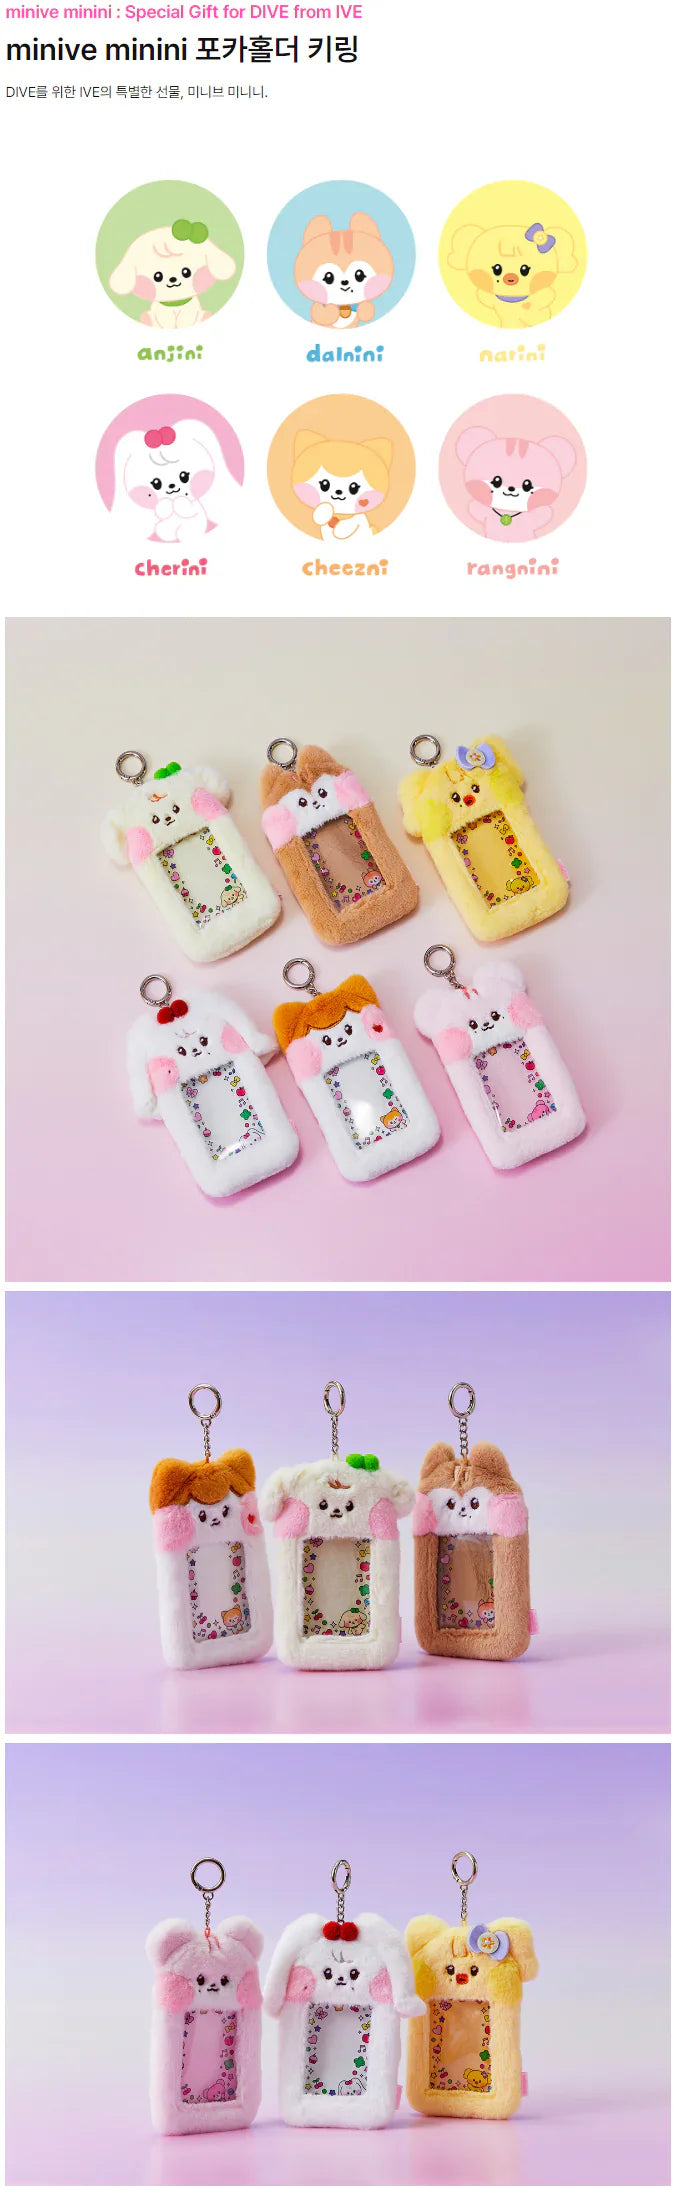 [PRE ORDER] IVE - MINIVE- MININI (Official MD) Photocard Holder﻿ Keyring